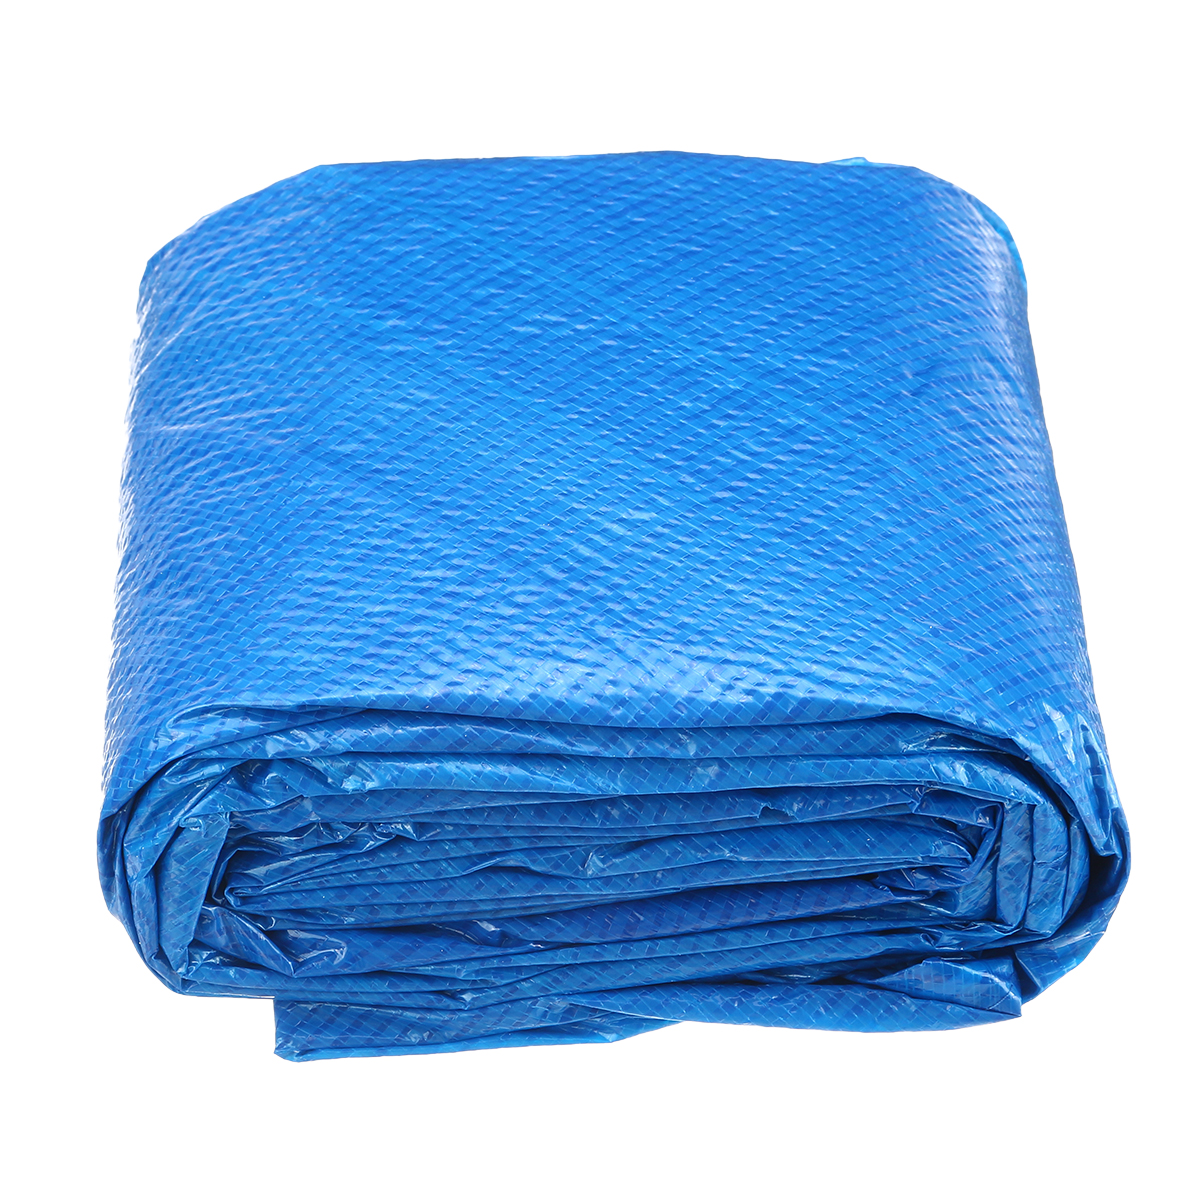 244305366cm-Round-Inflatable-Paddling-Swimming-Pool-Dust-Cover-Tarp-Rope-1712508-3